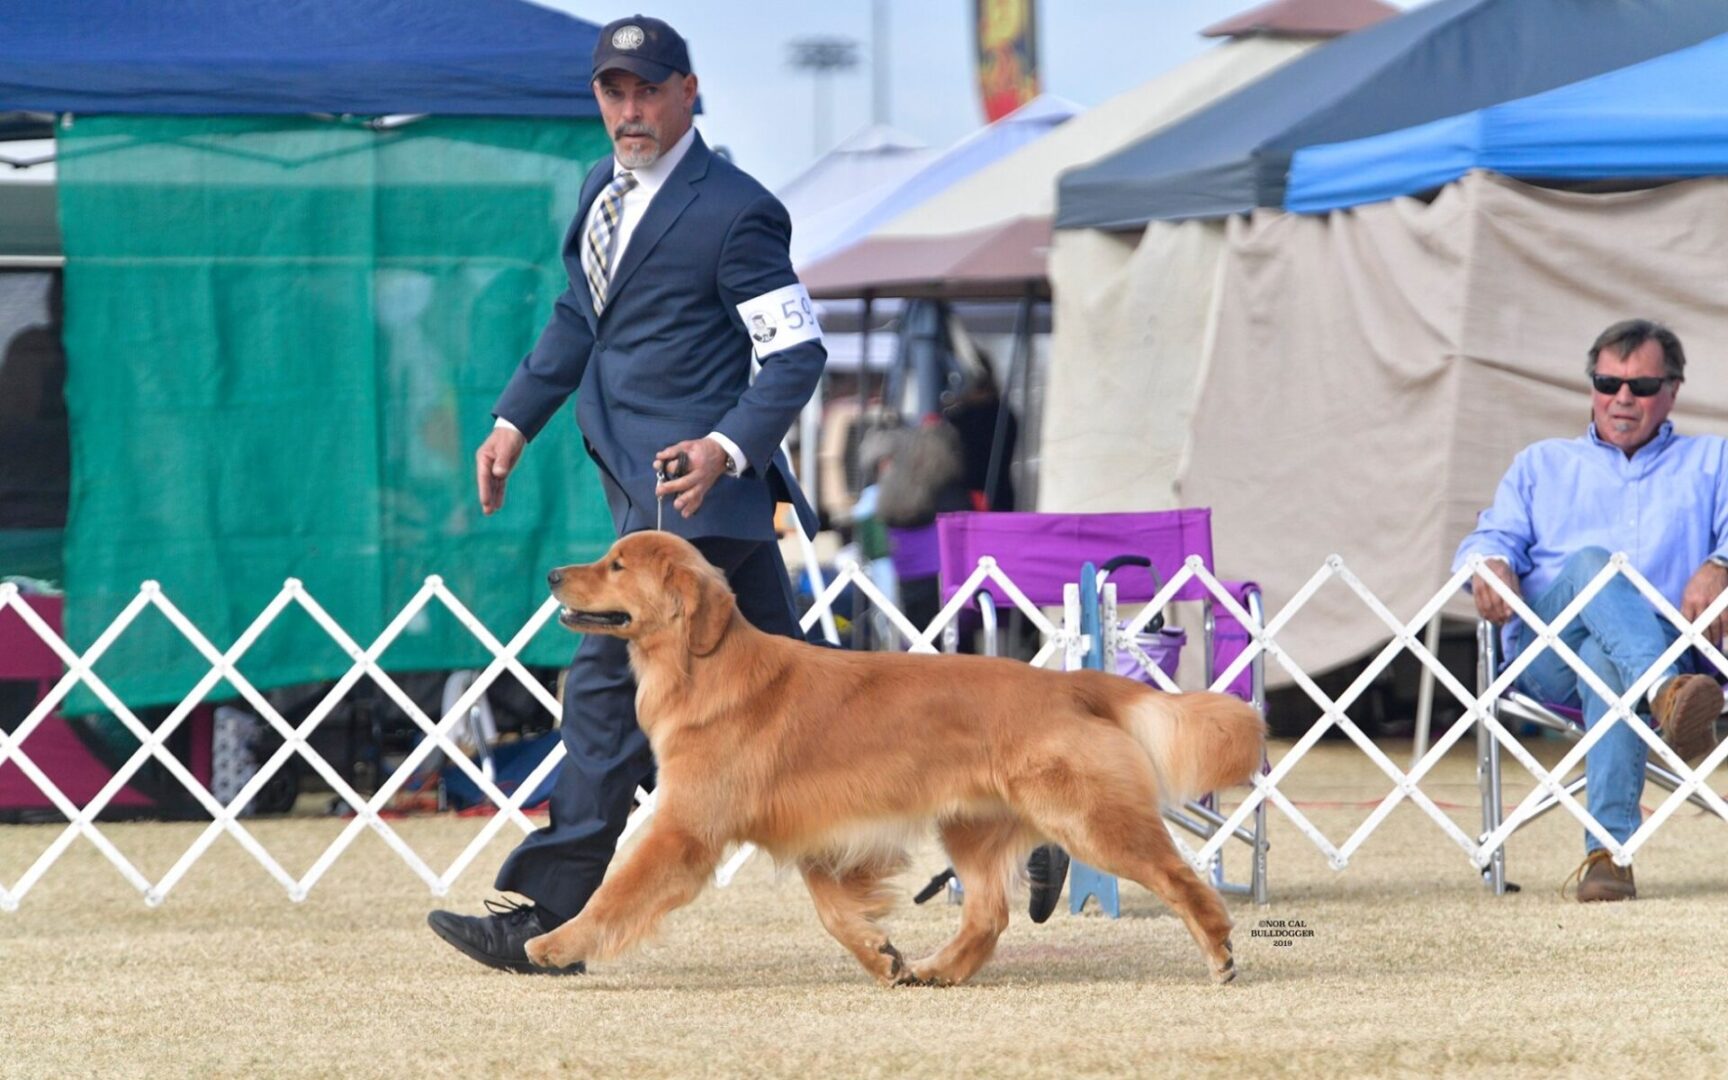 A man in a suit walking a golden retriever at a dog show.